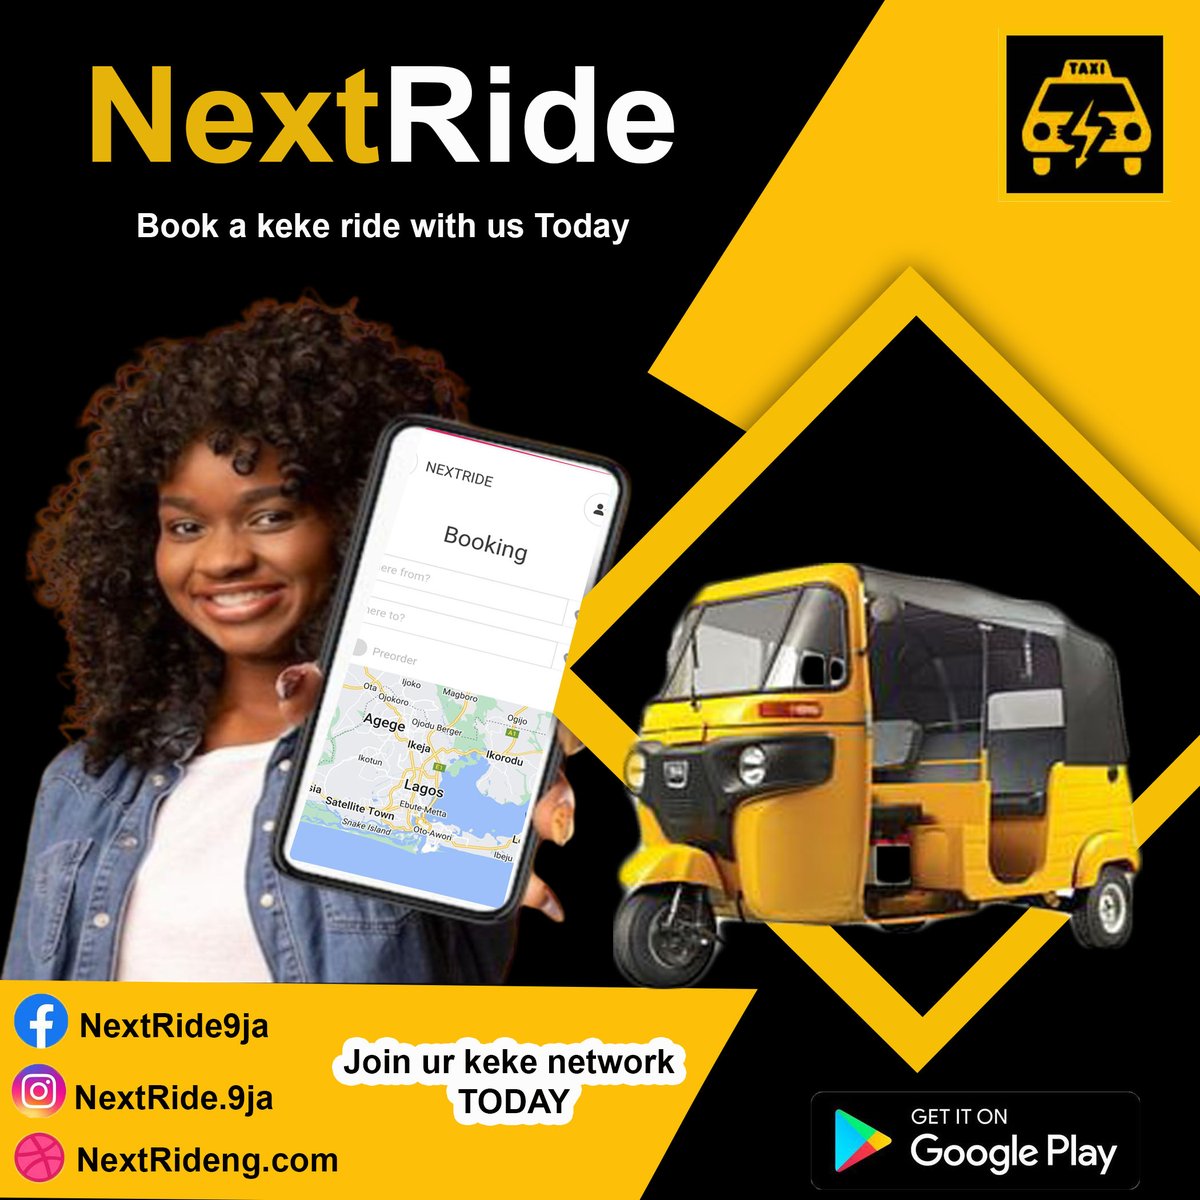 Book a ride with us today?
download NextRide on google playstore today